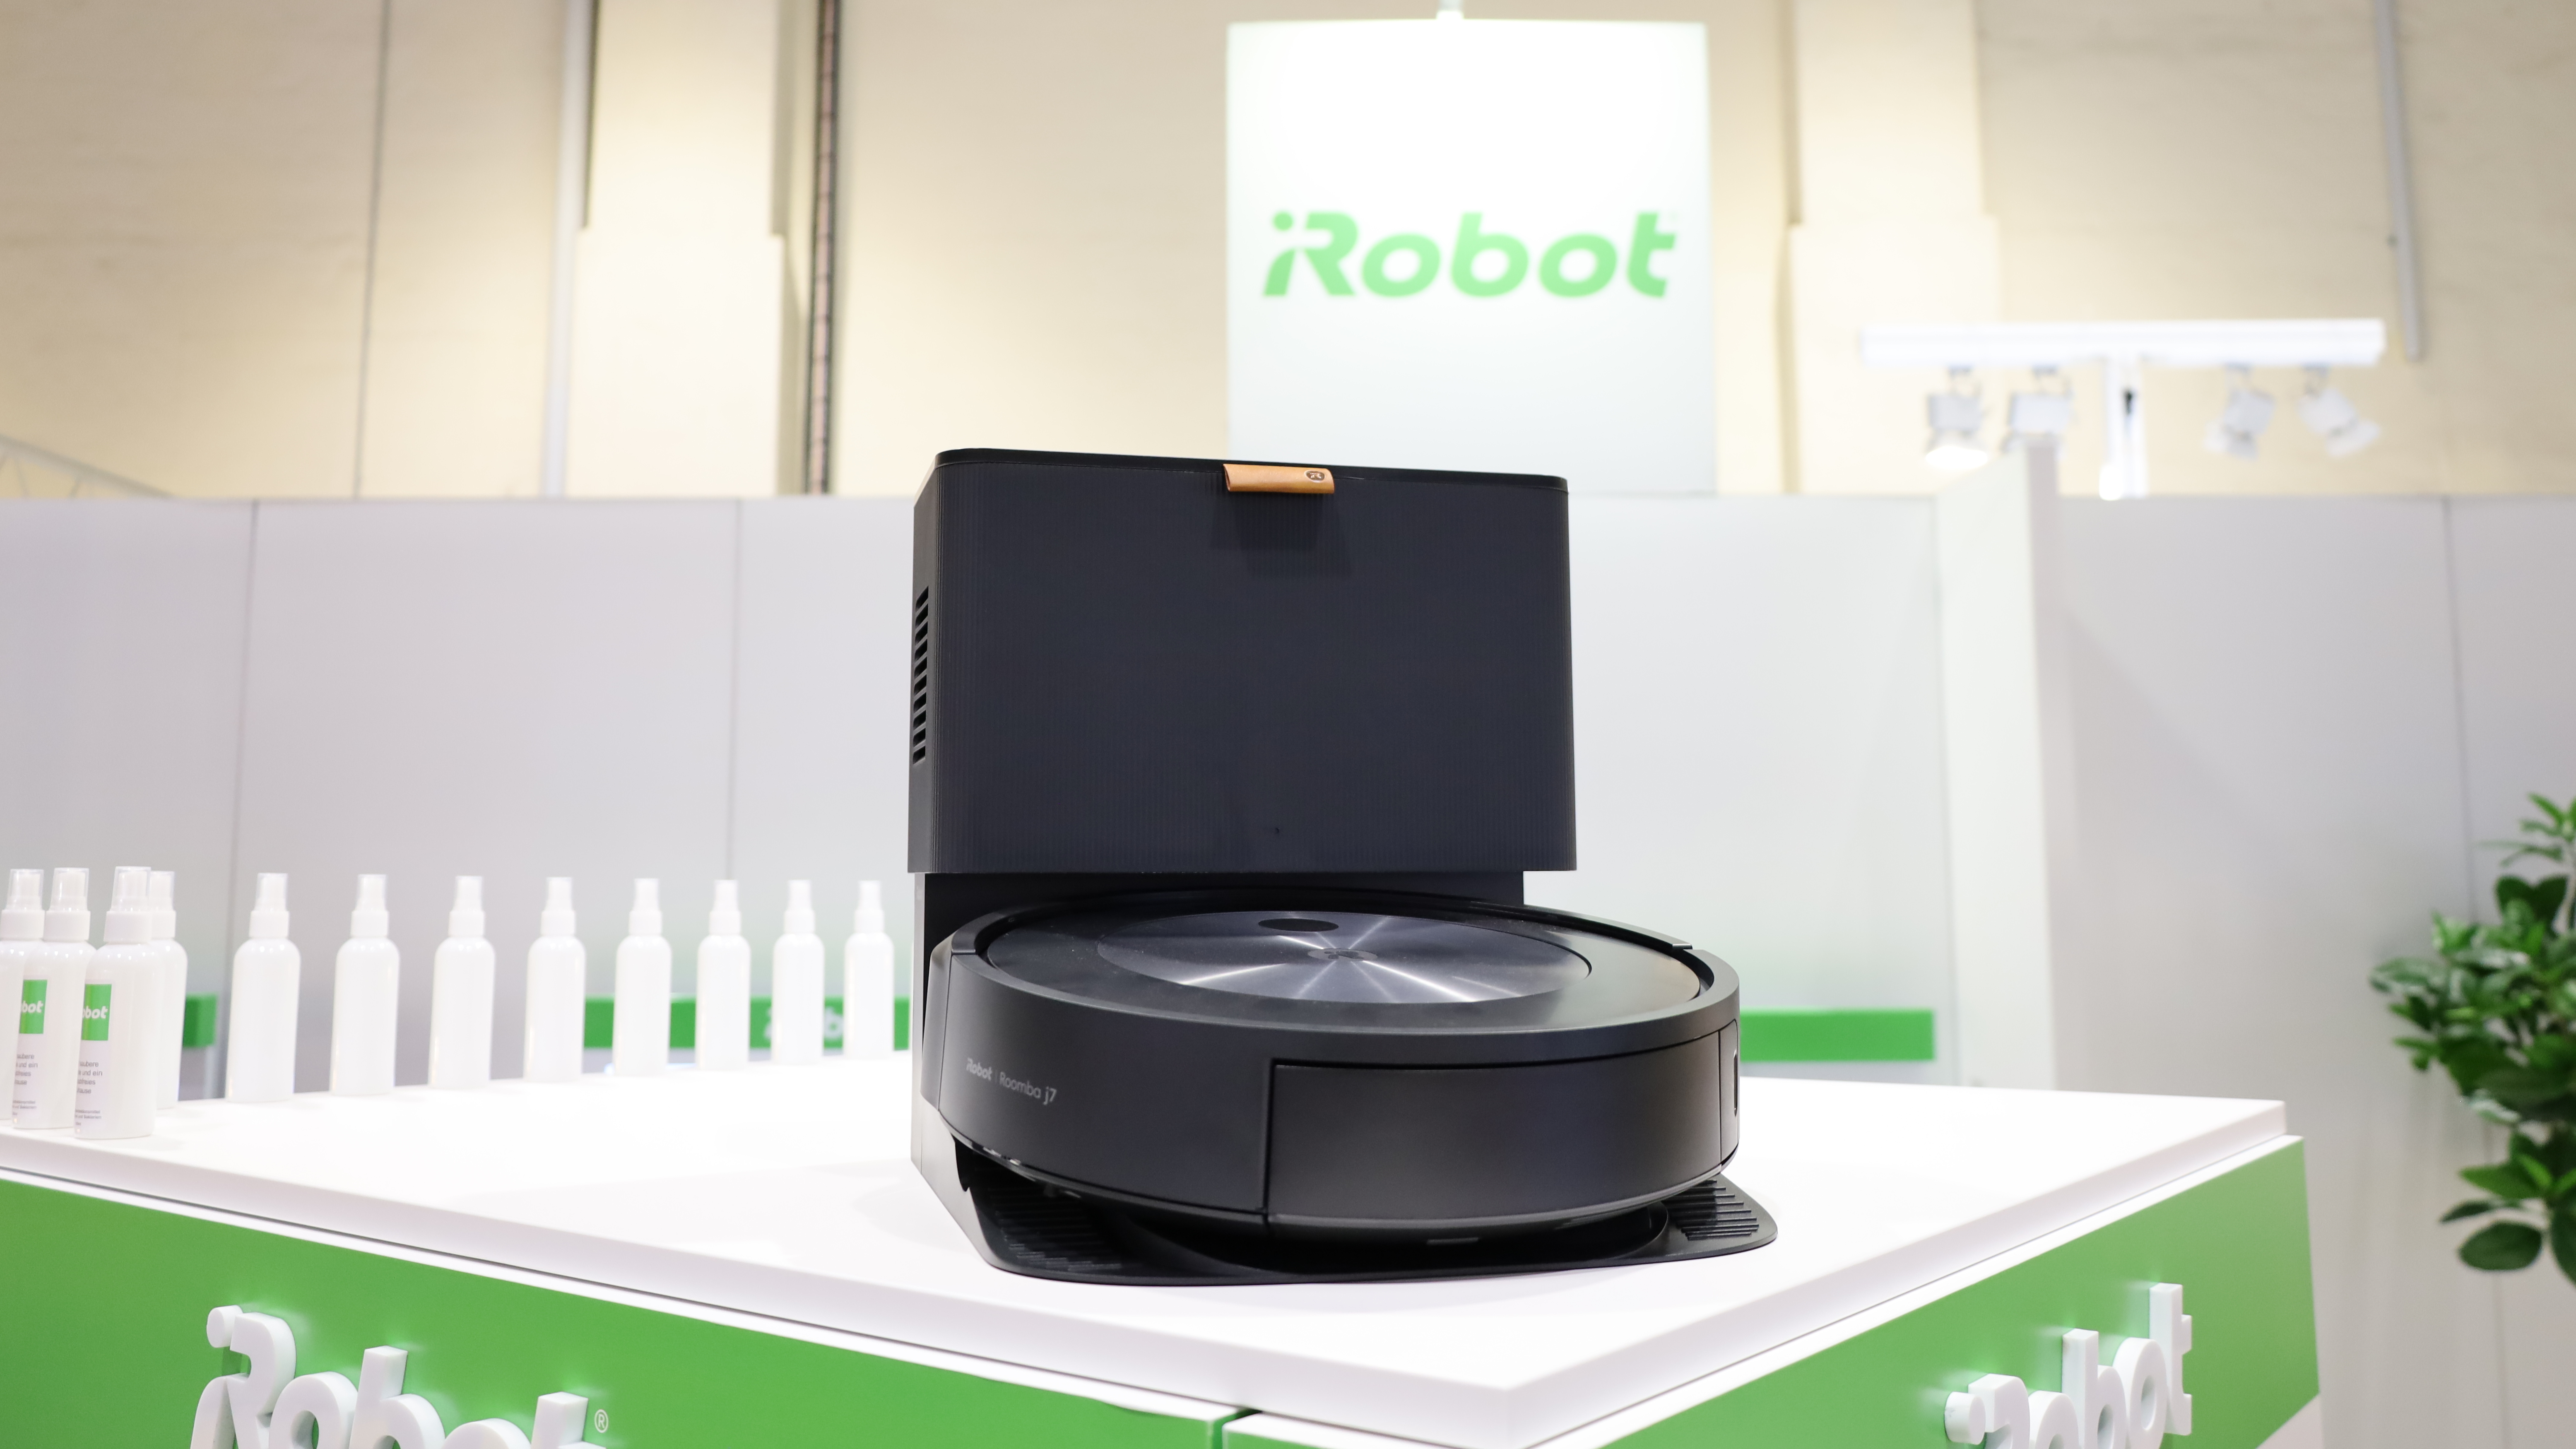 The new Roomba sends photos to users